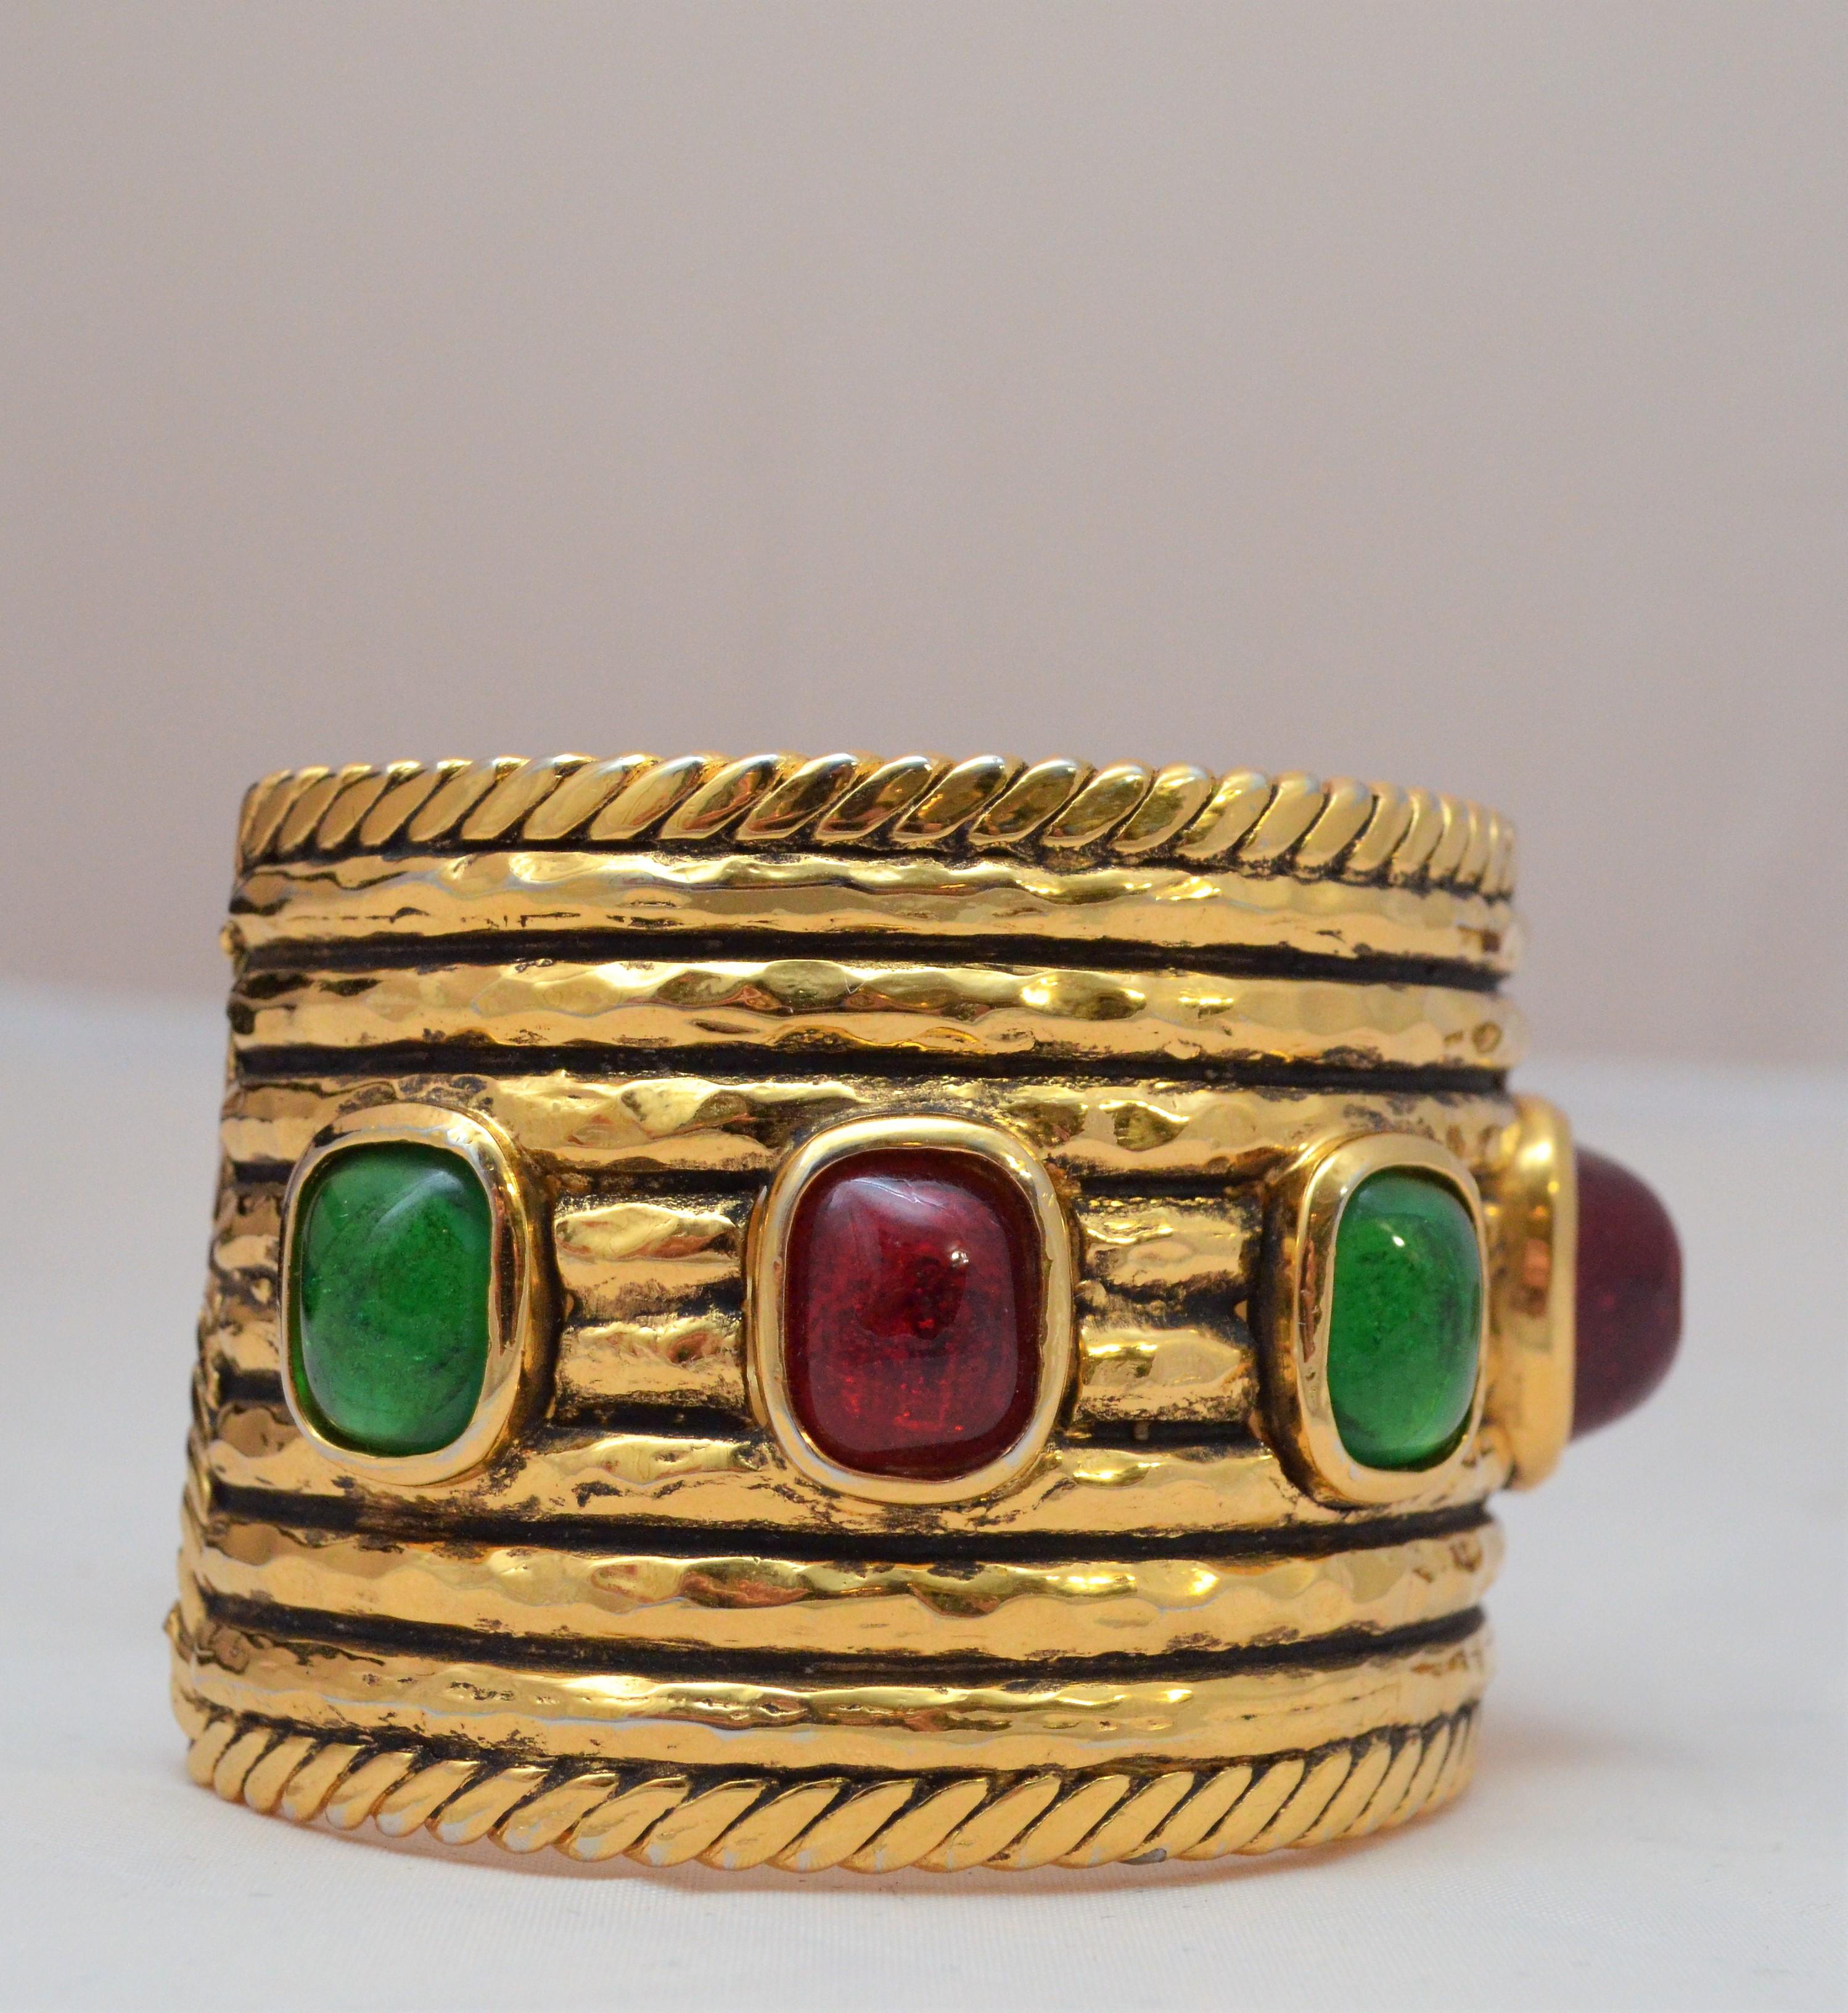 Vintage 1990's Chanel Gold Cuff with red and green Gripoix poured glass stones -- Cuff featured in 24k plated gold with red and green glass gripoix stones. Cuff is from 1984. Measures 9.25” with a 1” opening. Excellent vintage condition. Designer